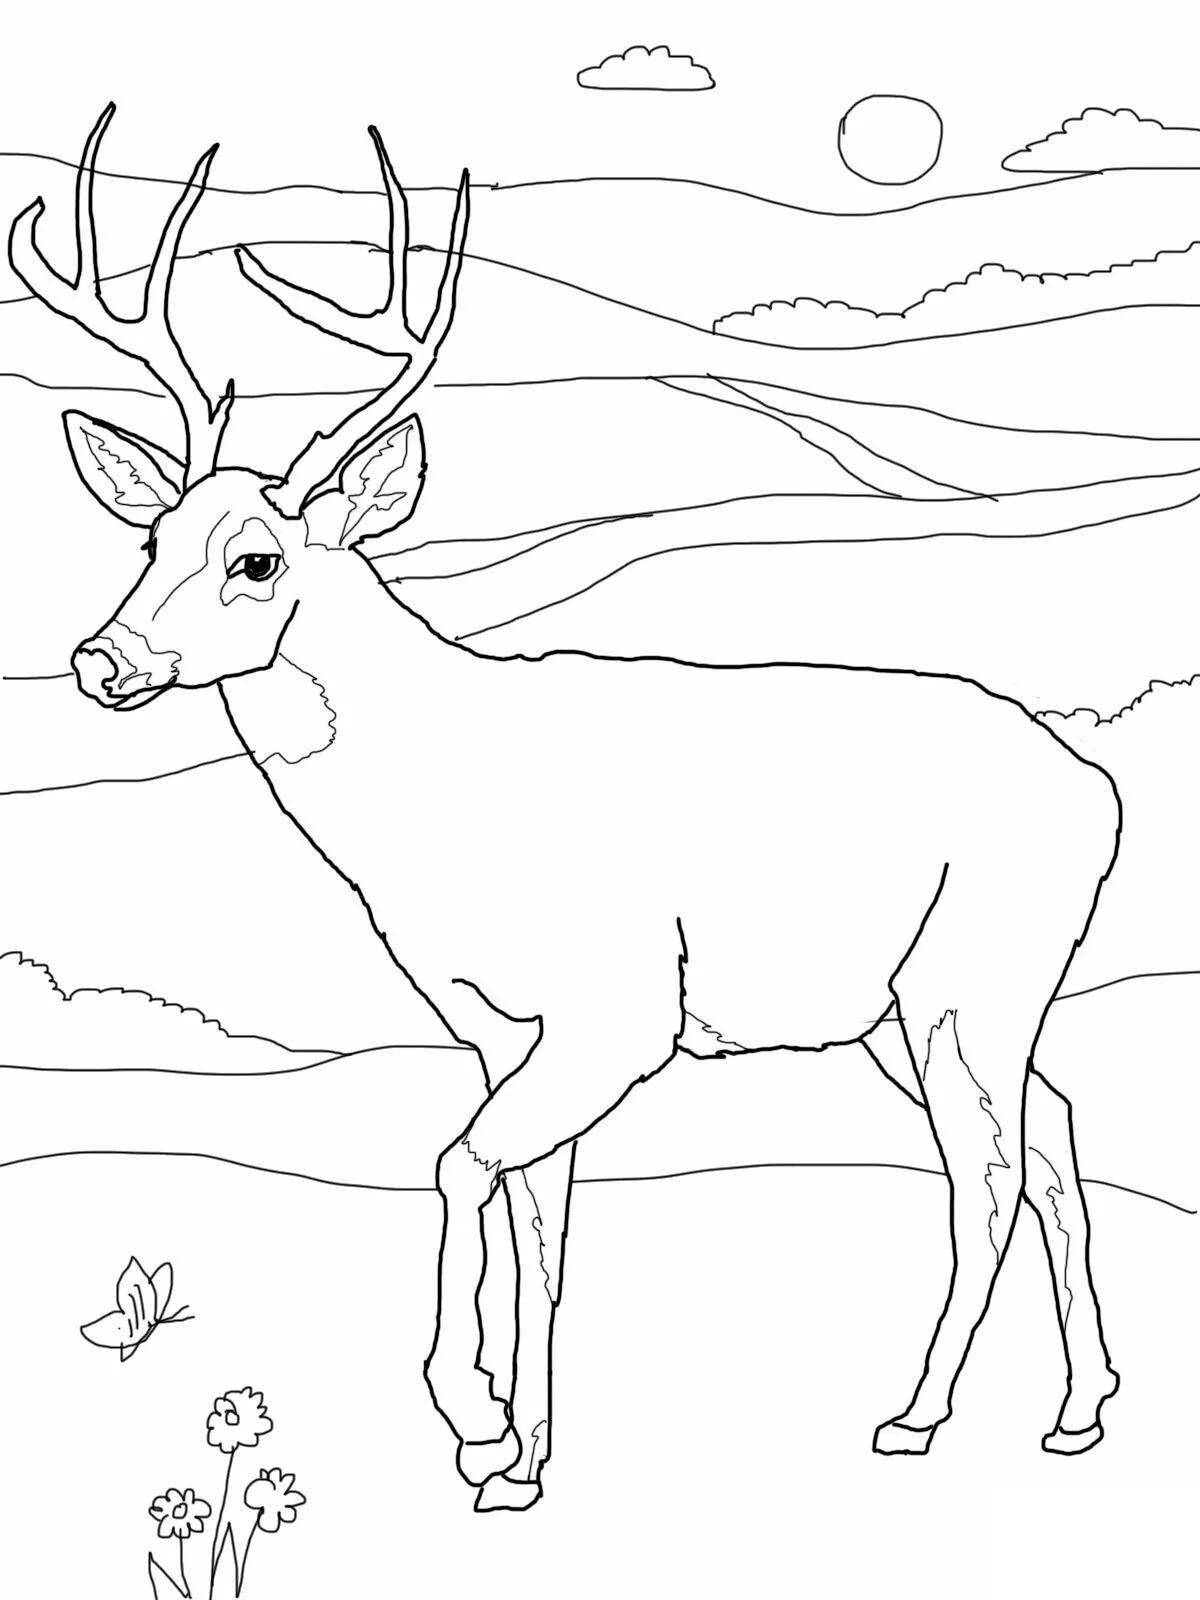 Shiny northern animals coloring pages for kids